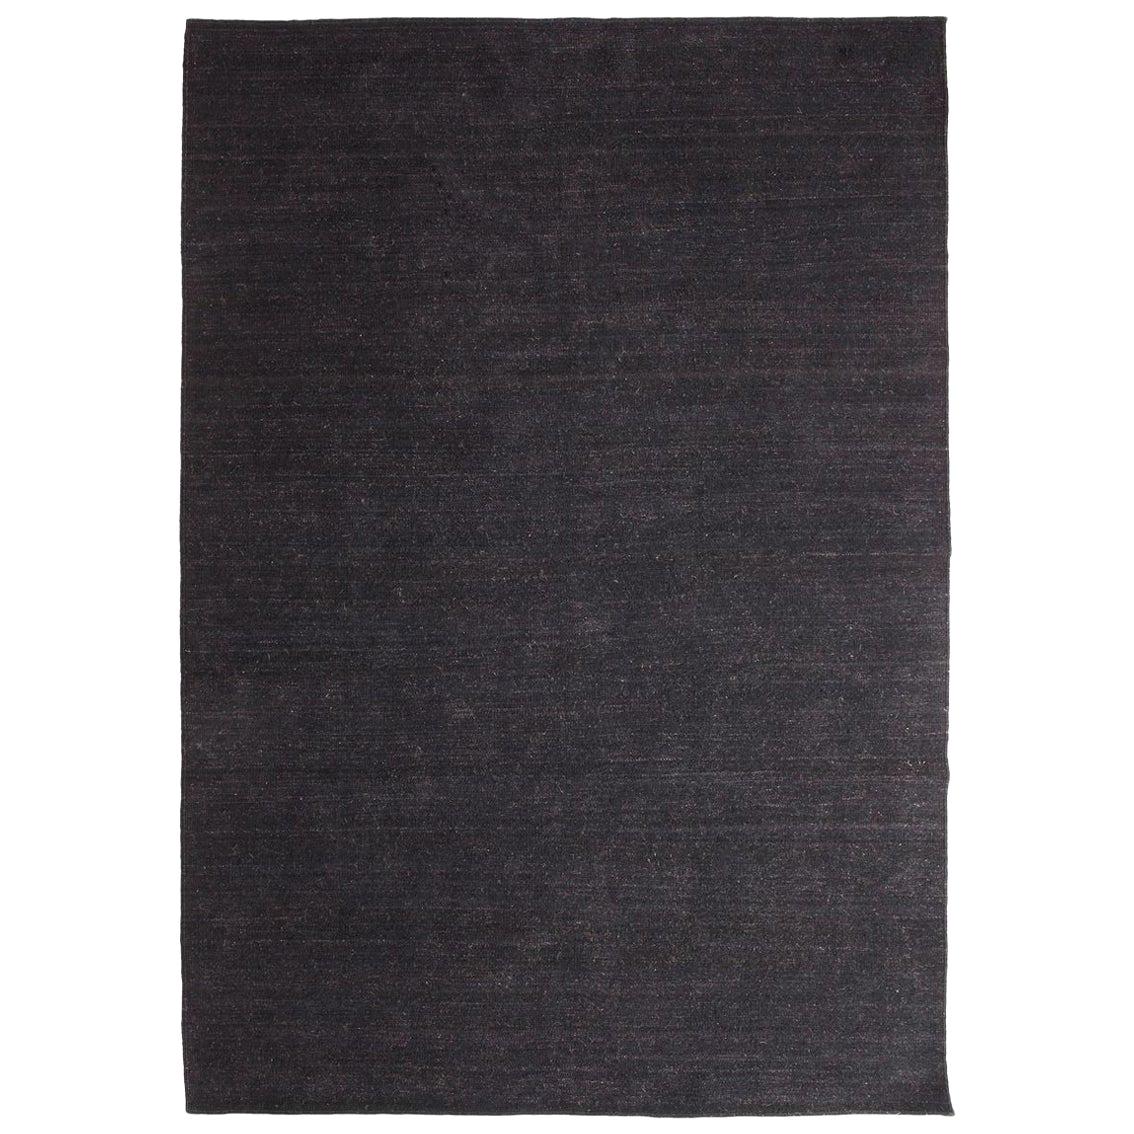 Nomad Black Hand-Loomed Wool Rug by Nani Marquina & Ariadna Miquel, Medium For Sale